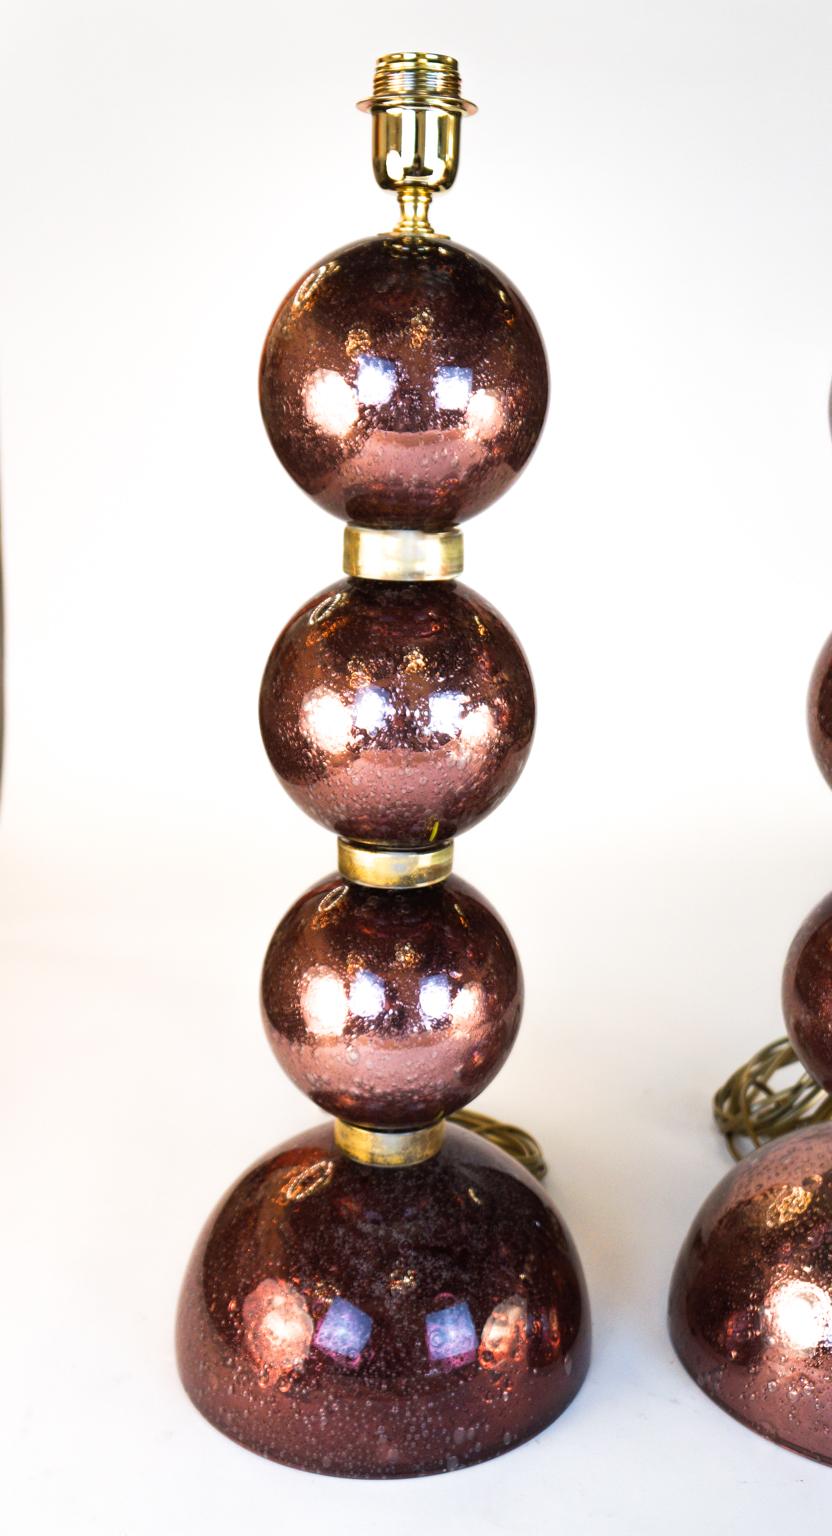 Alberto Donà Mid-Century Modern Italian Murano Glass Pair of Table Lamps, 1995s For Sale 1